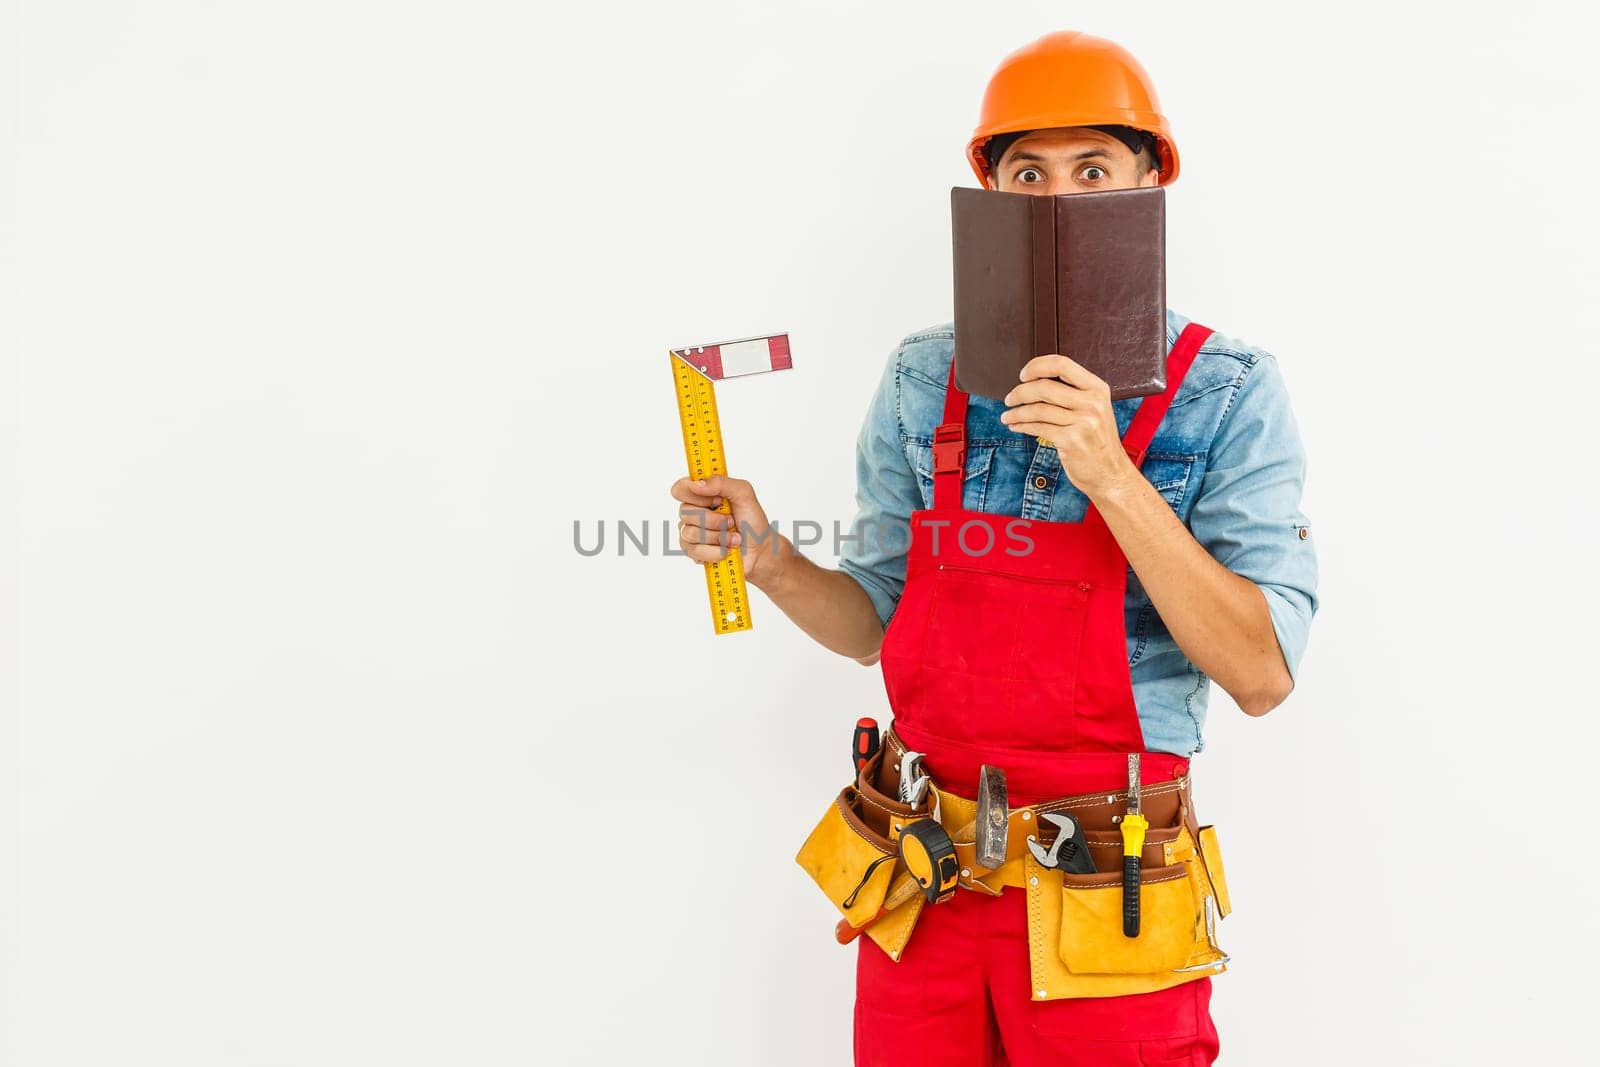 Portrait of cheerful young worker wearing hardhat over white background.